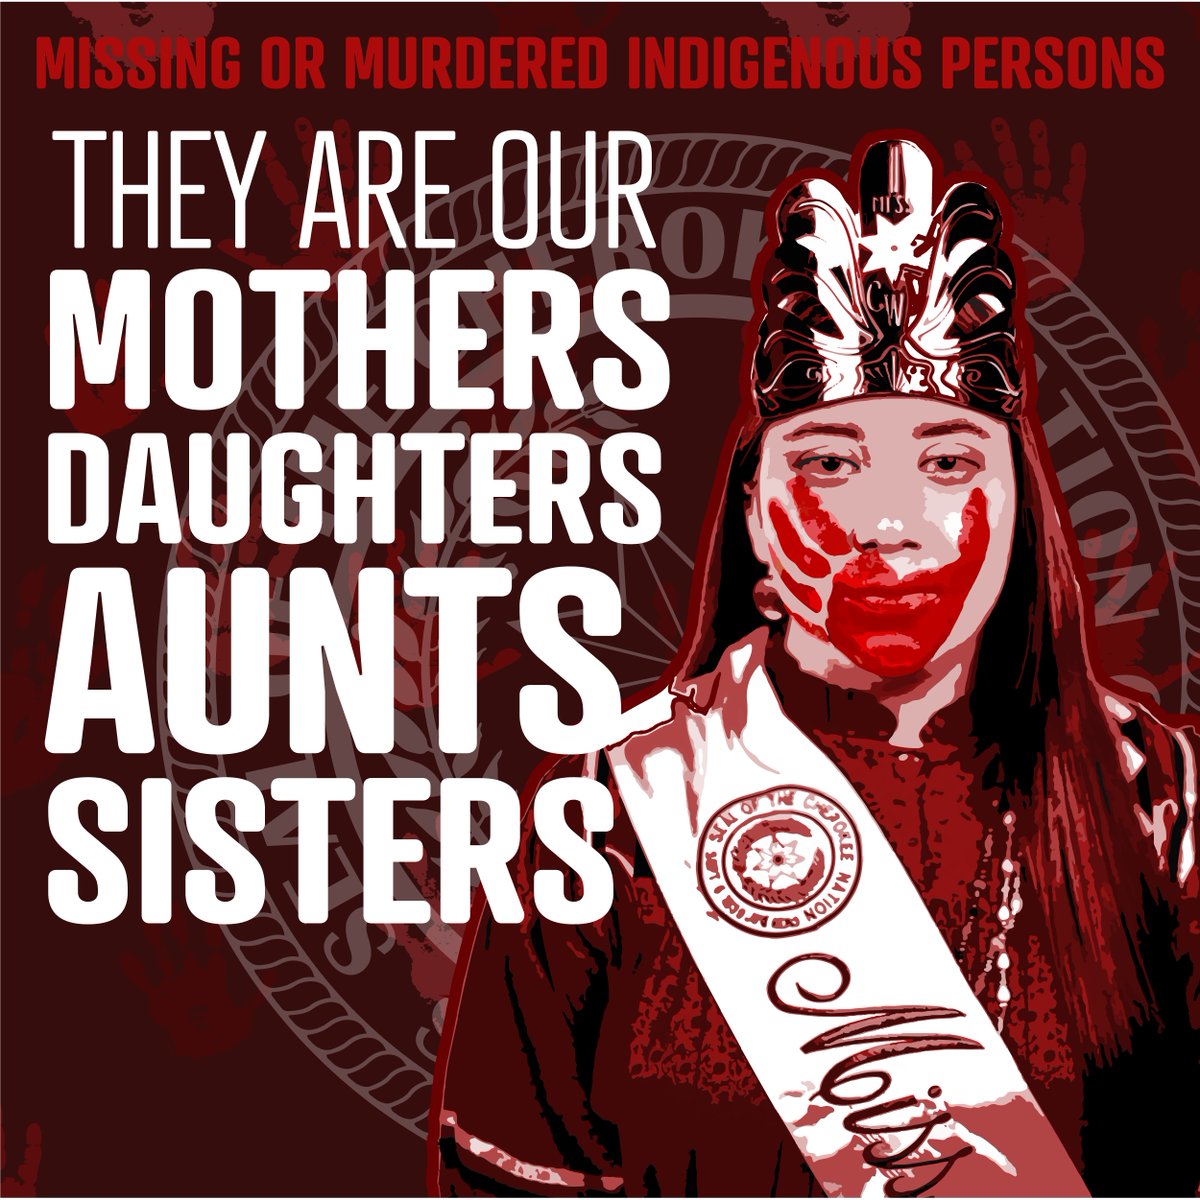 Today — and always — we must work #together to end this cycle of missing and murdered Indigenous people and bring missing Cherokees home to their families and communities. #MMIWG #MMIWG2S #NoMoreStolenSisters #MMIWActionNow #MMIP #MMIW #NotInvisible